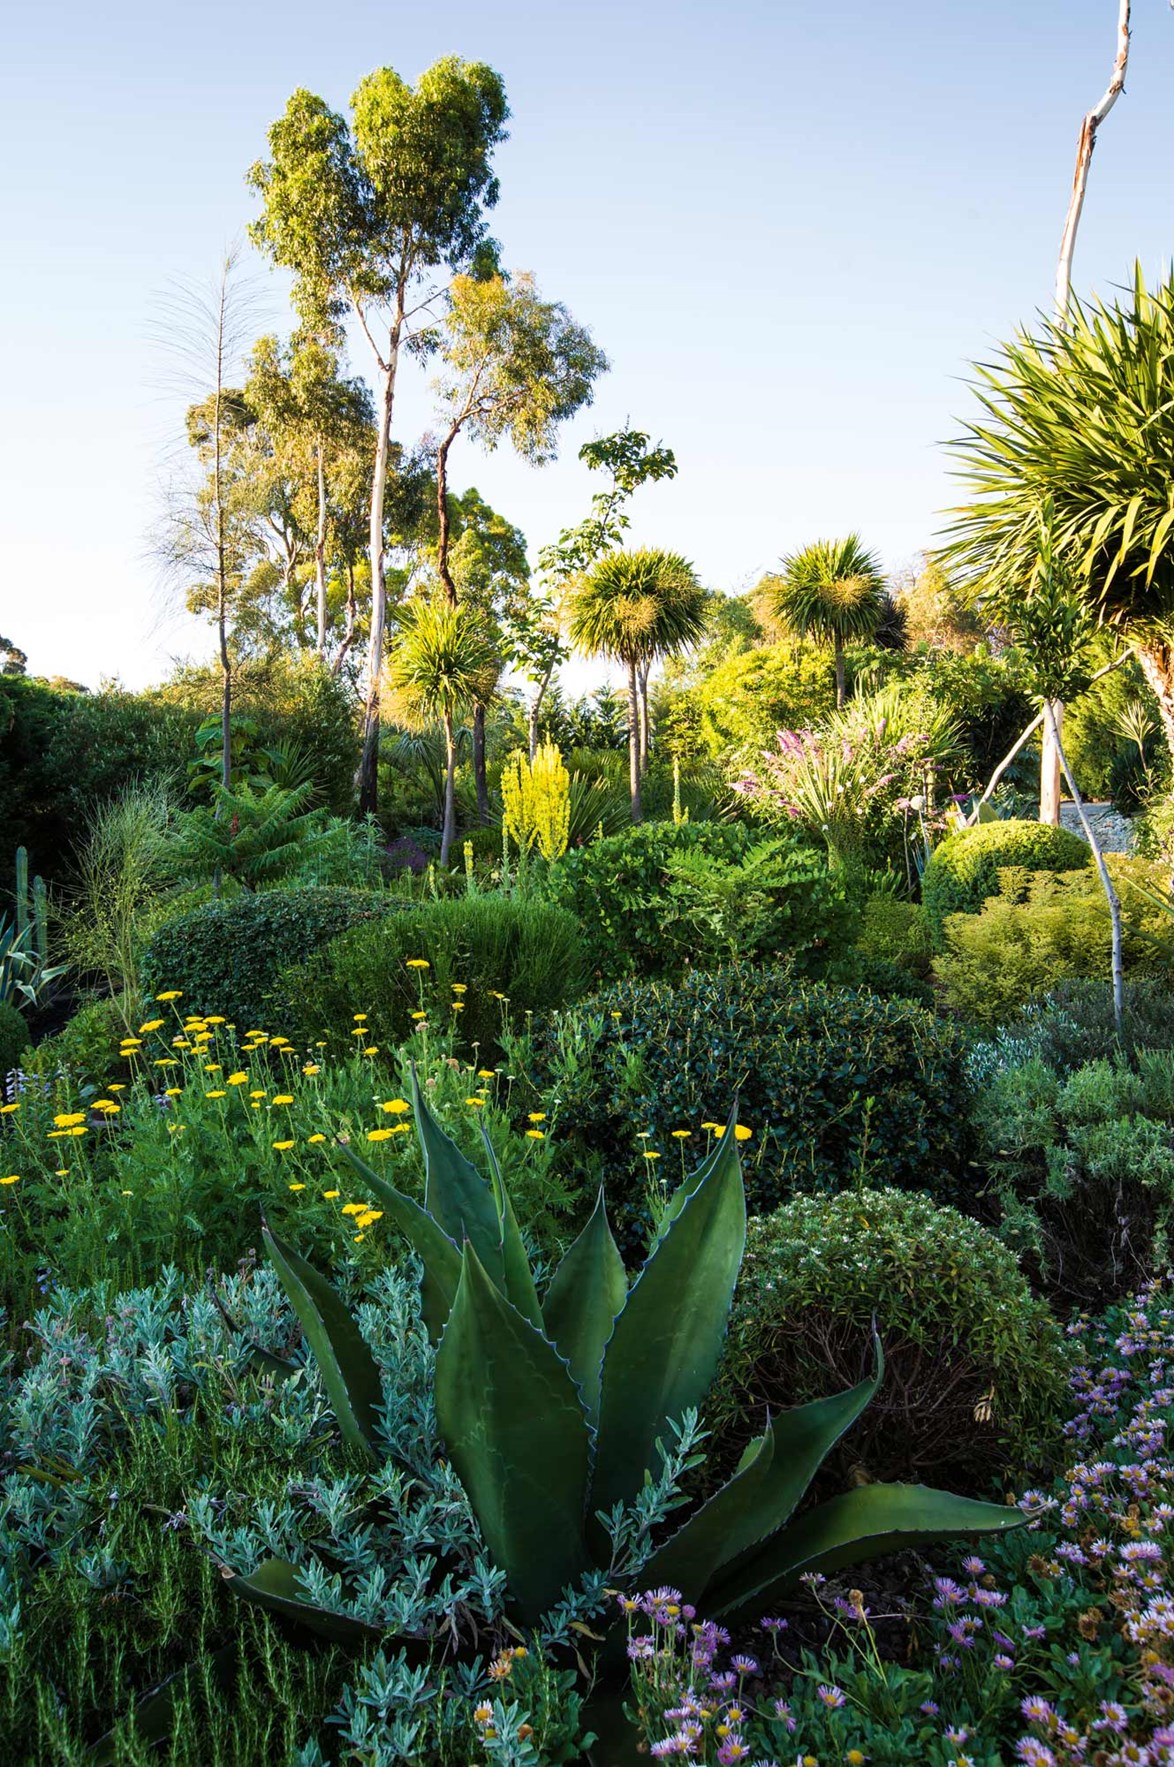 Every inch of this [front garden featuring a variety of succulents](https://www.homestolove.com.au/front-yard-succulent-garden-13749|target="_blank") has been designed to make a statement. Sculptural leaves of Agave and aloe are shaded by overarching date palms, while the trunks of towering eucalypts have been pruned to appear even taller than they actually are. Add flowering cacti and the yellow blooms of Verbascum and the end result is a very captivating tropical garden. *Photo: Claire Takacs*